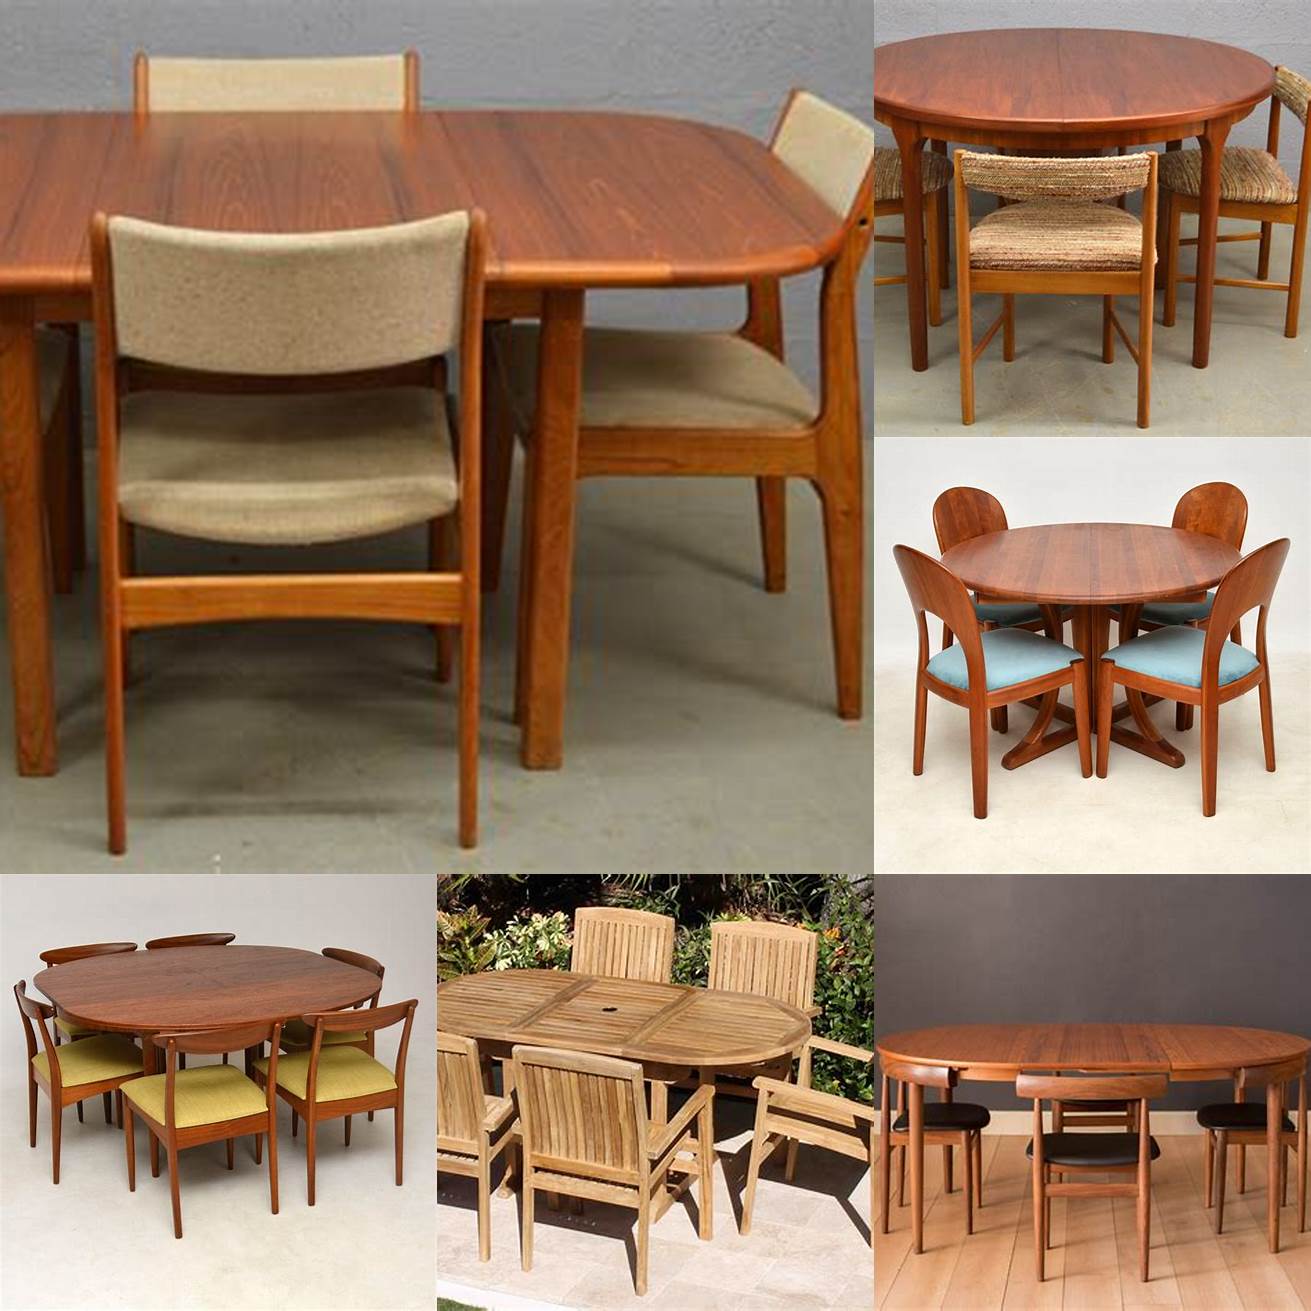 Classic Teak Chairs and Tables